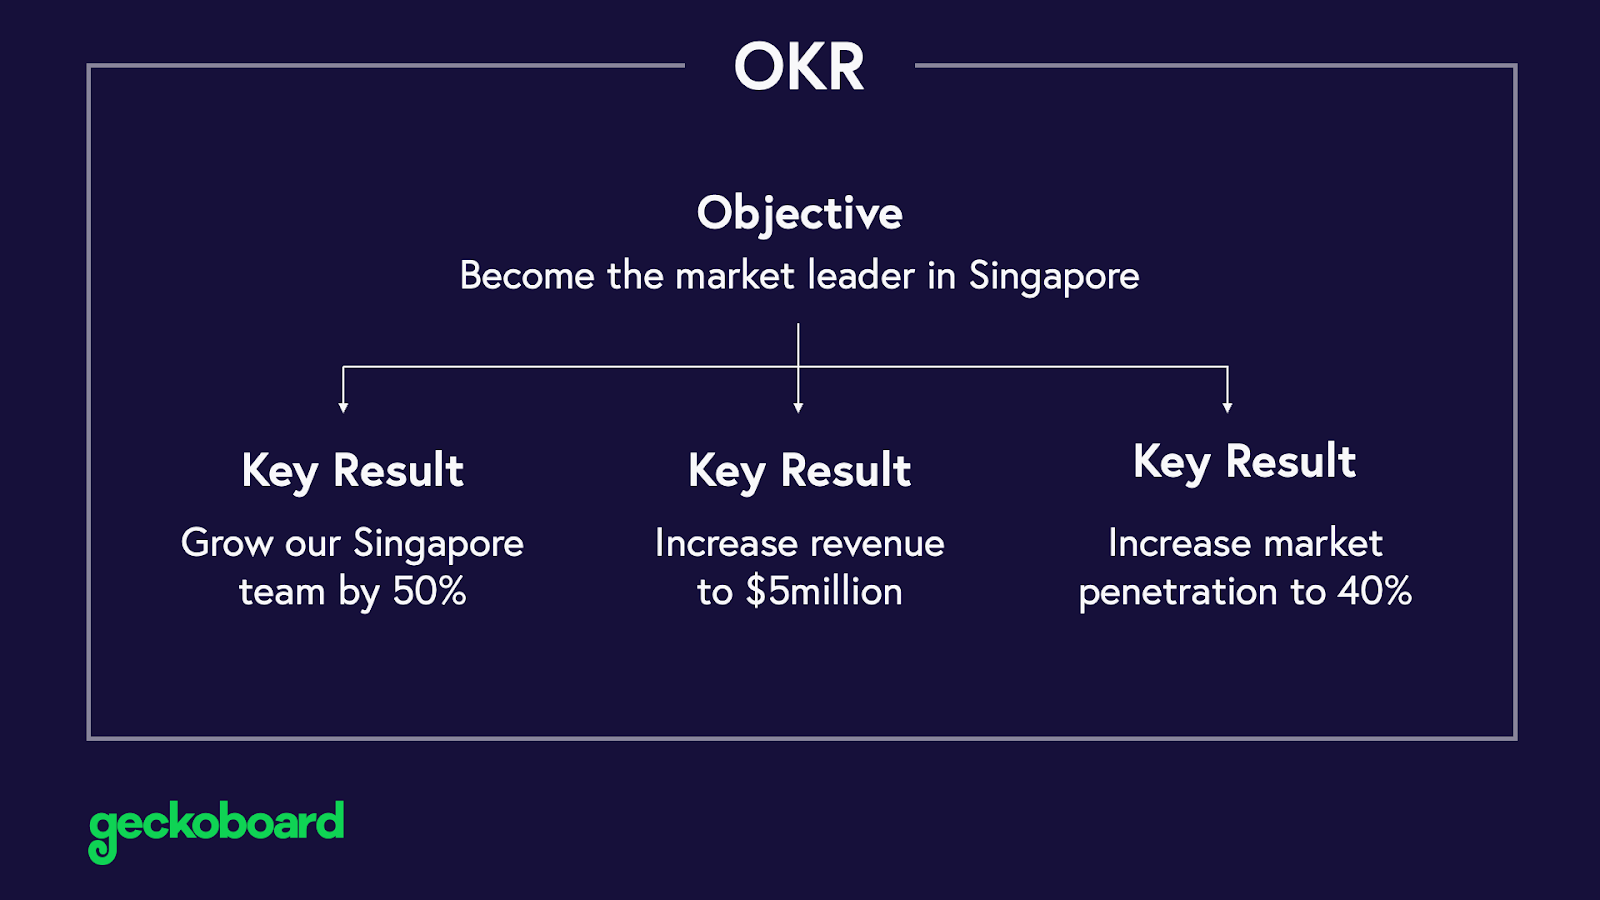 Example of on OKR to become the market leader in Singapore